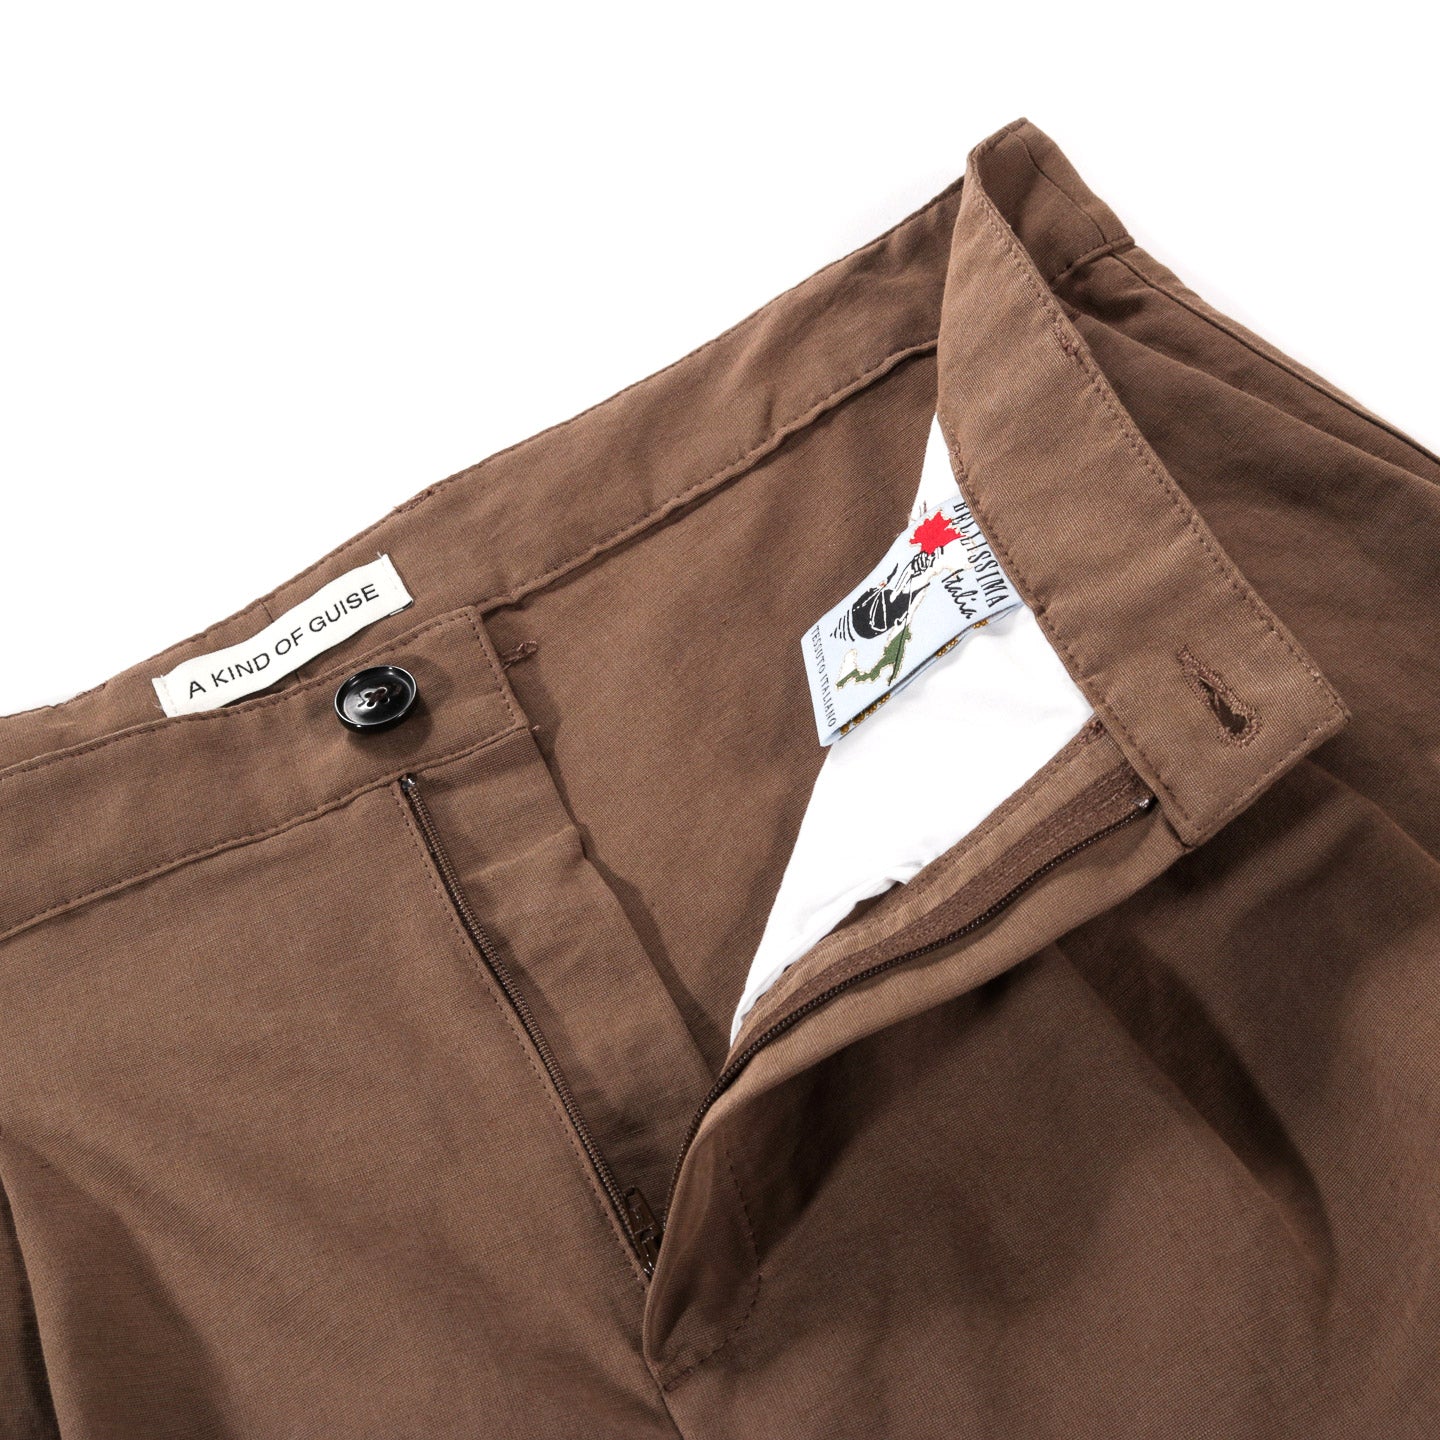 A KIND OF GUISE FLEXIBLE WIDE TROUSERS BROWN SUGAR